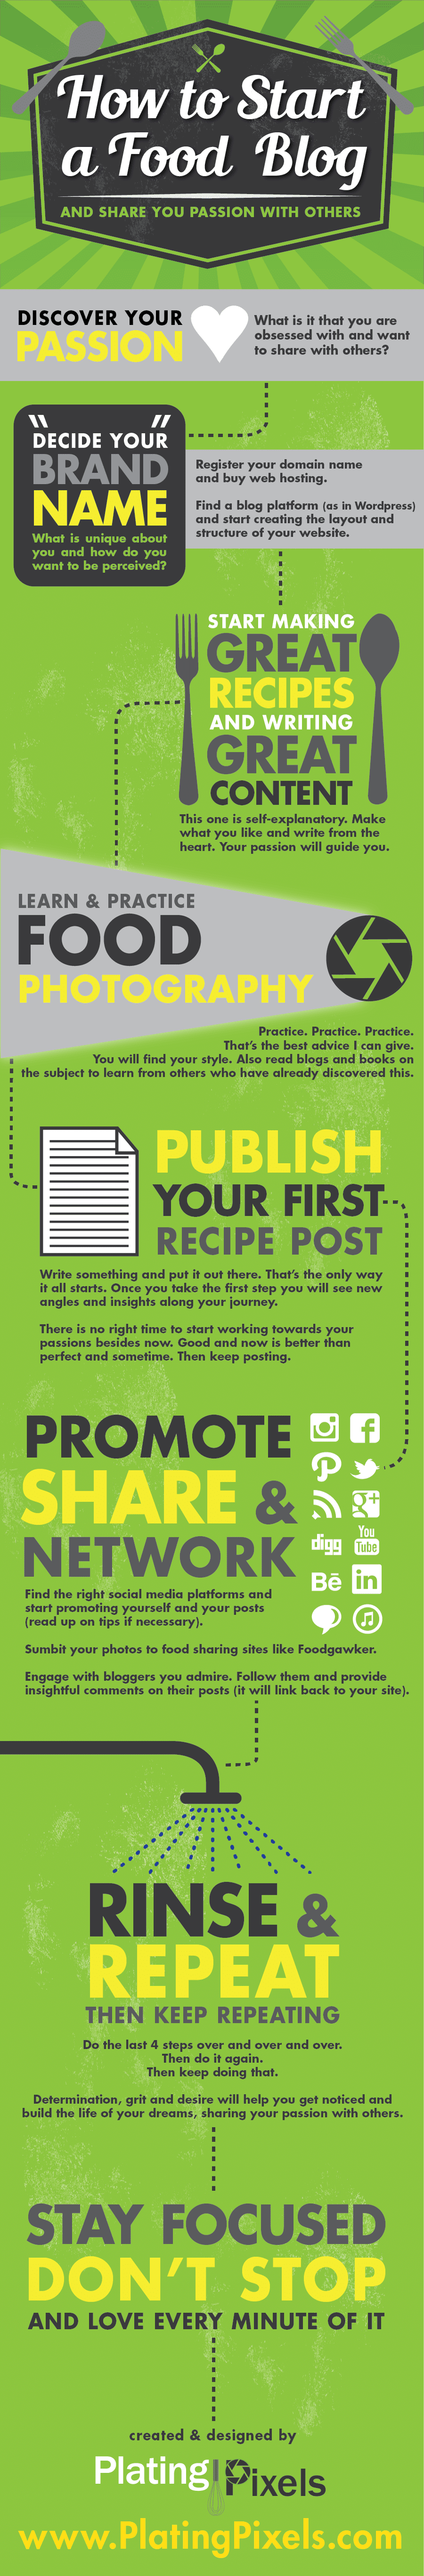 How to Start a Food Blog by Plating - #infographic